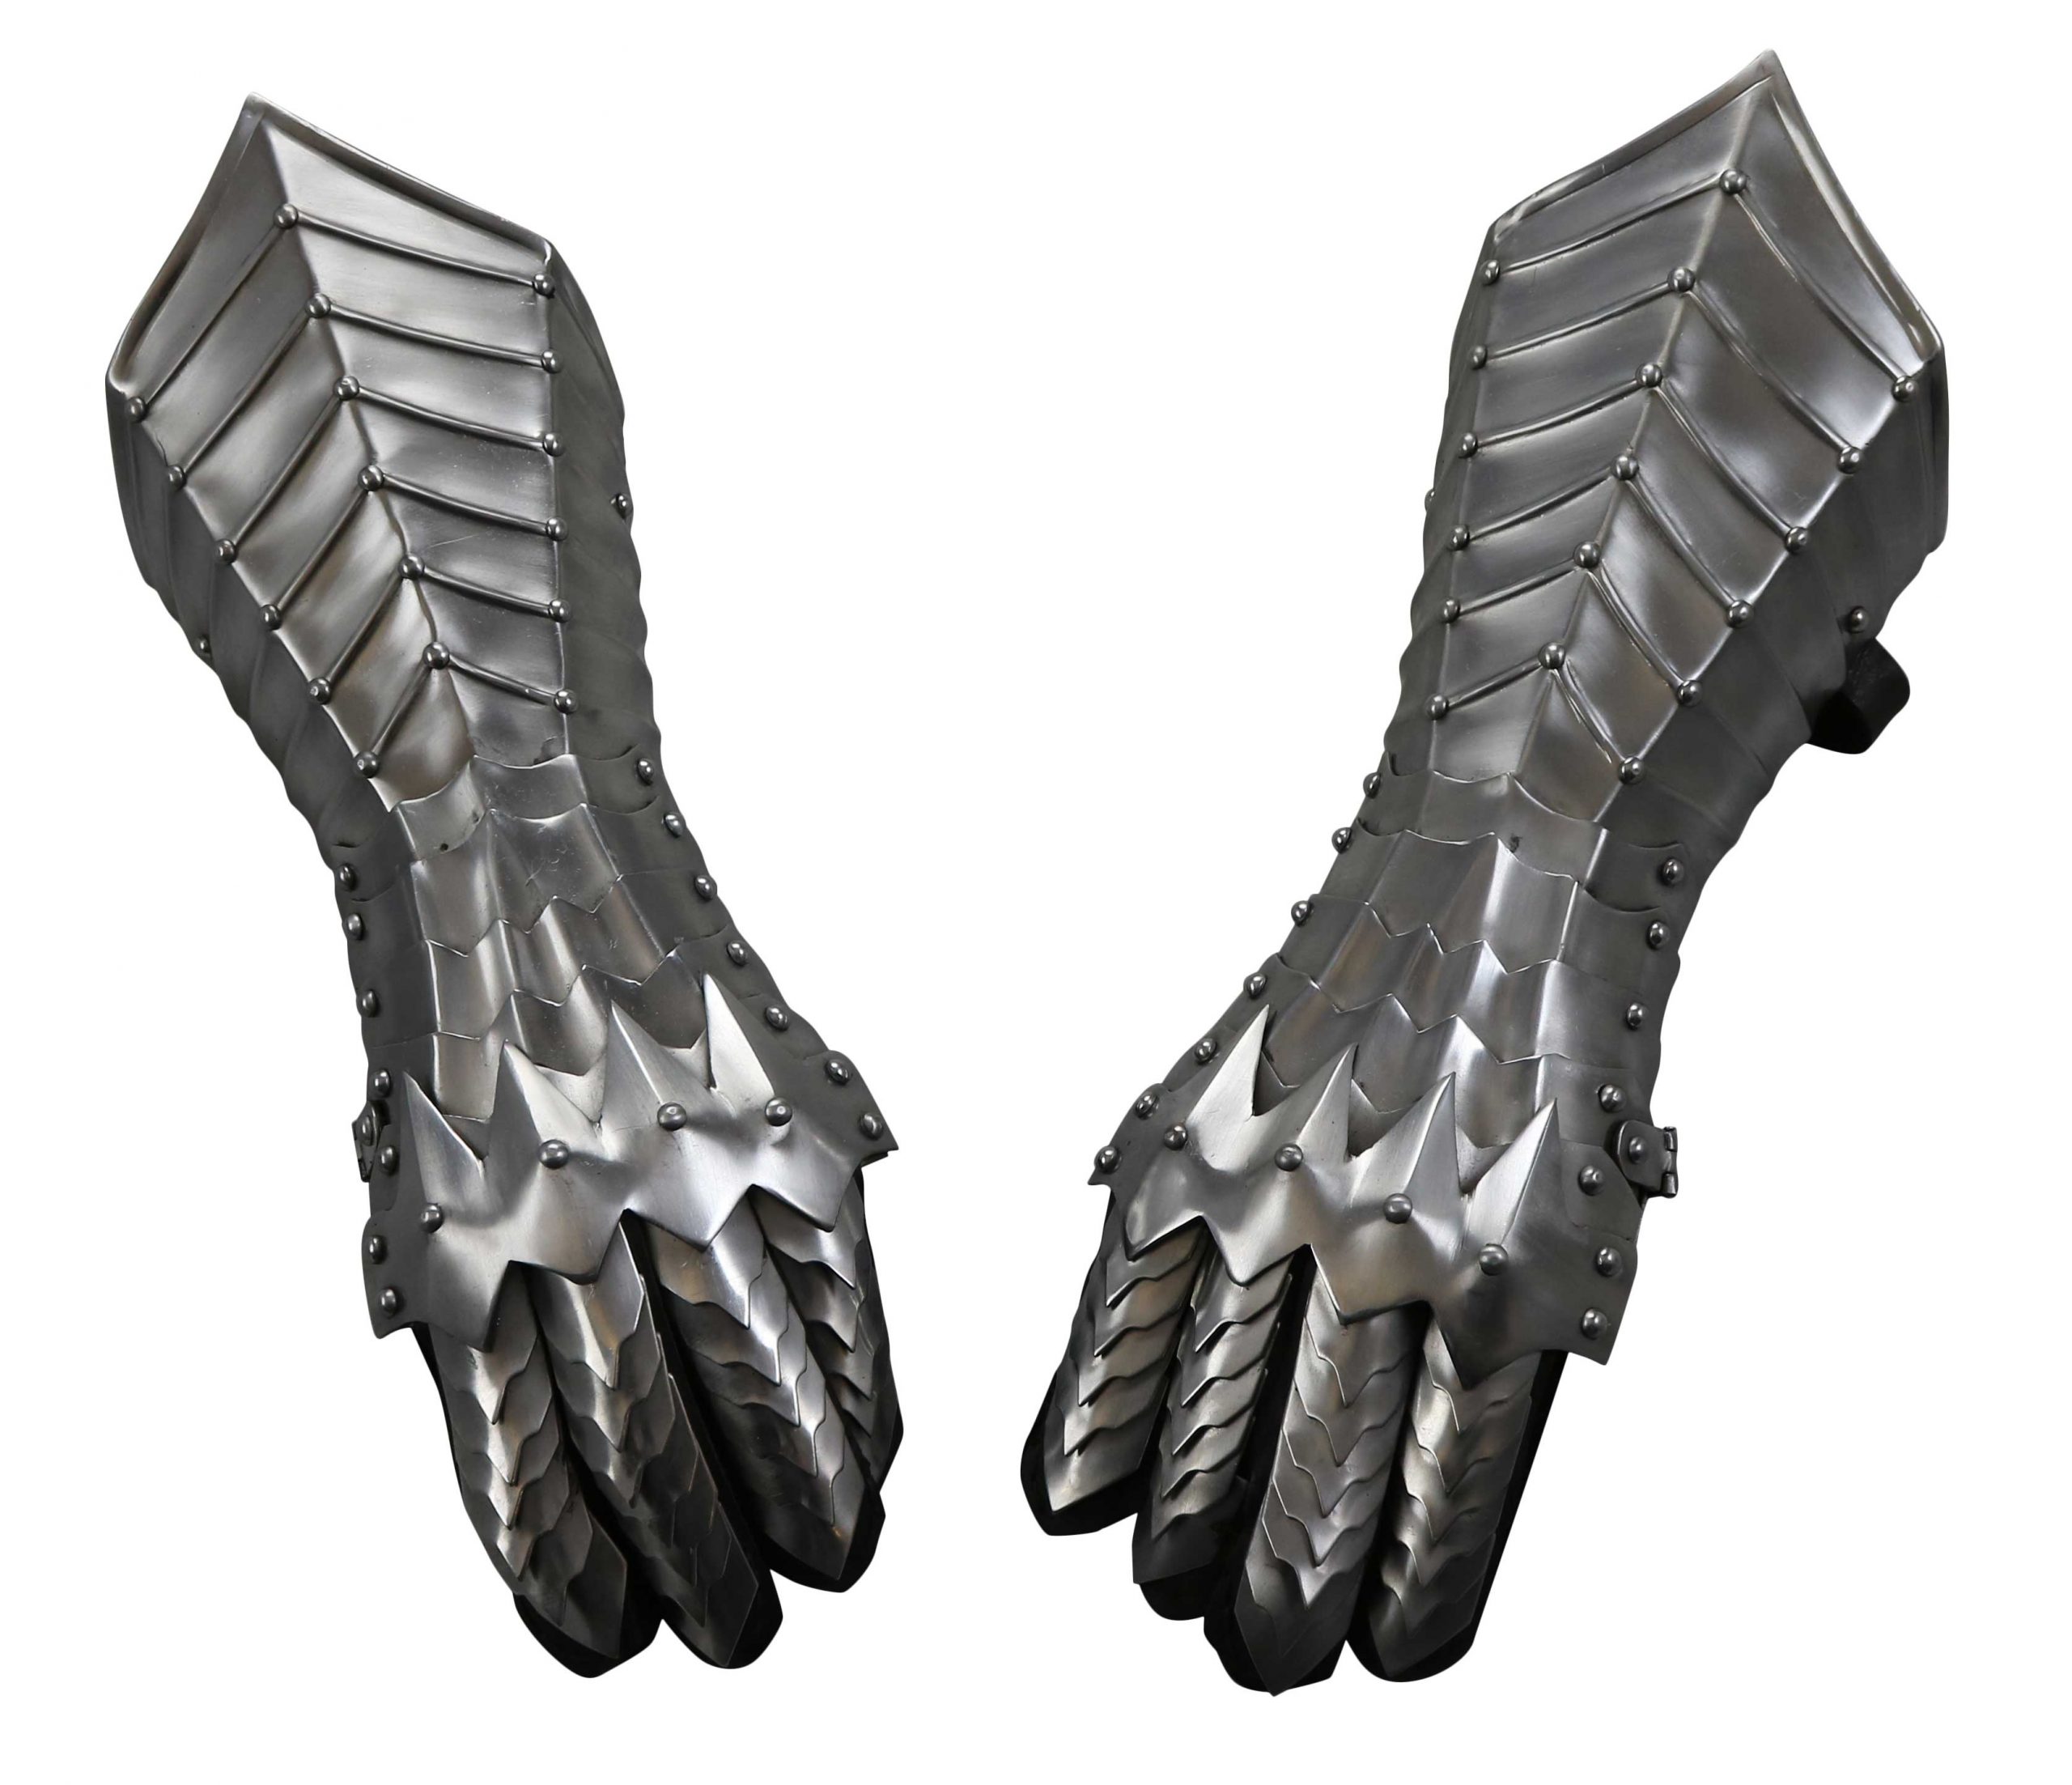 Nazgul Gauntlets Silver Steel Medieval Armor Lord Of The Rings Lotr Nazgul Fanta